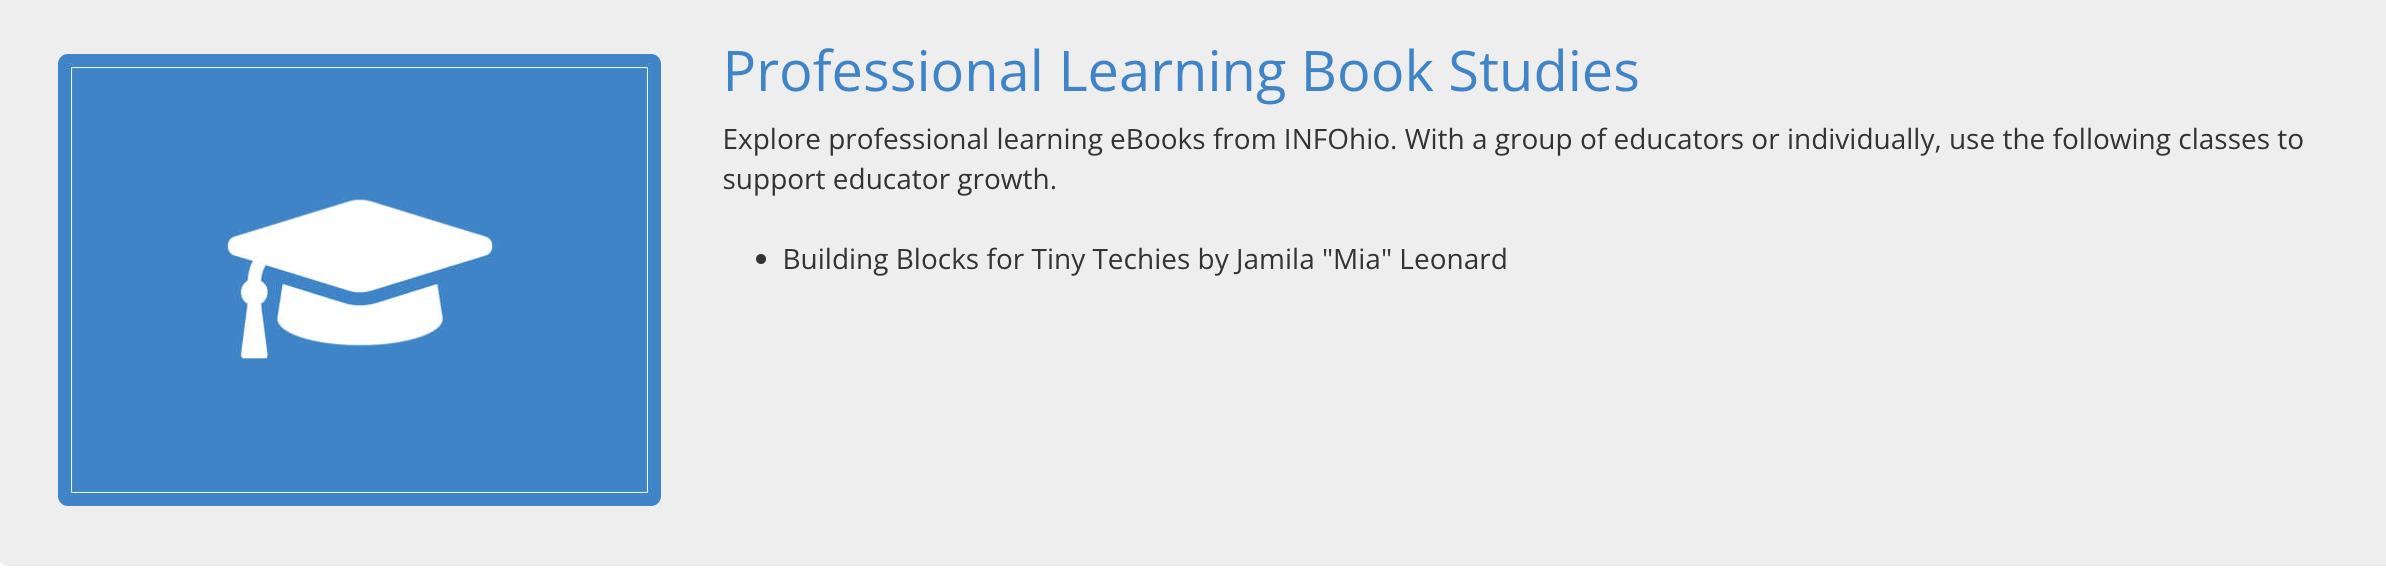 New Learning Pathway Developed for Professional Learning eBooks 